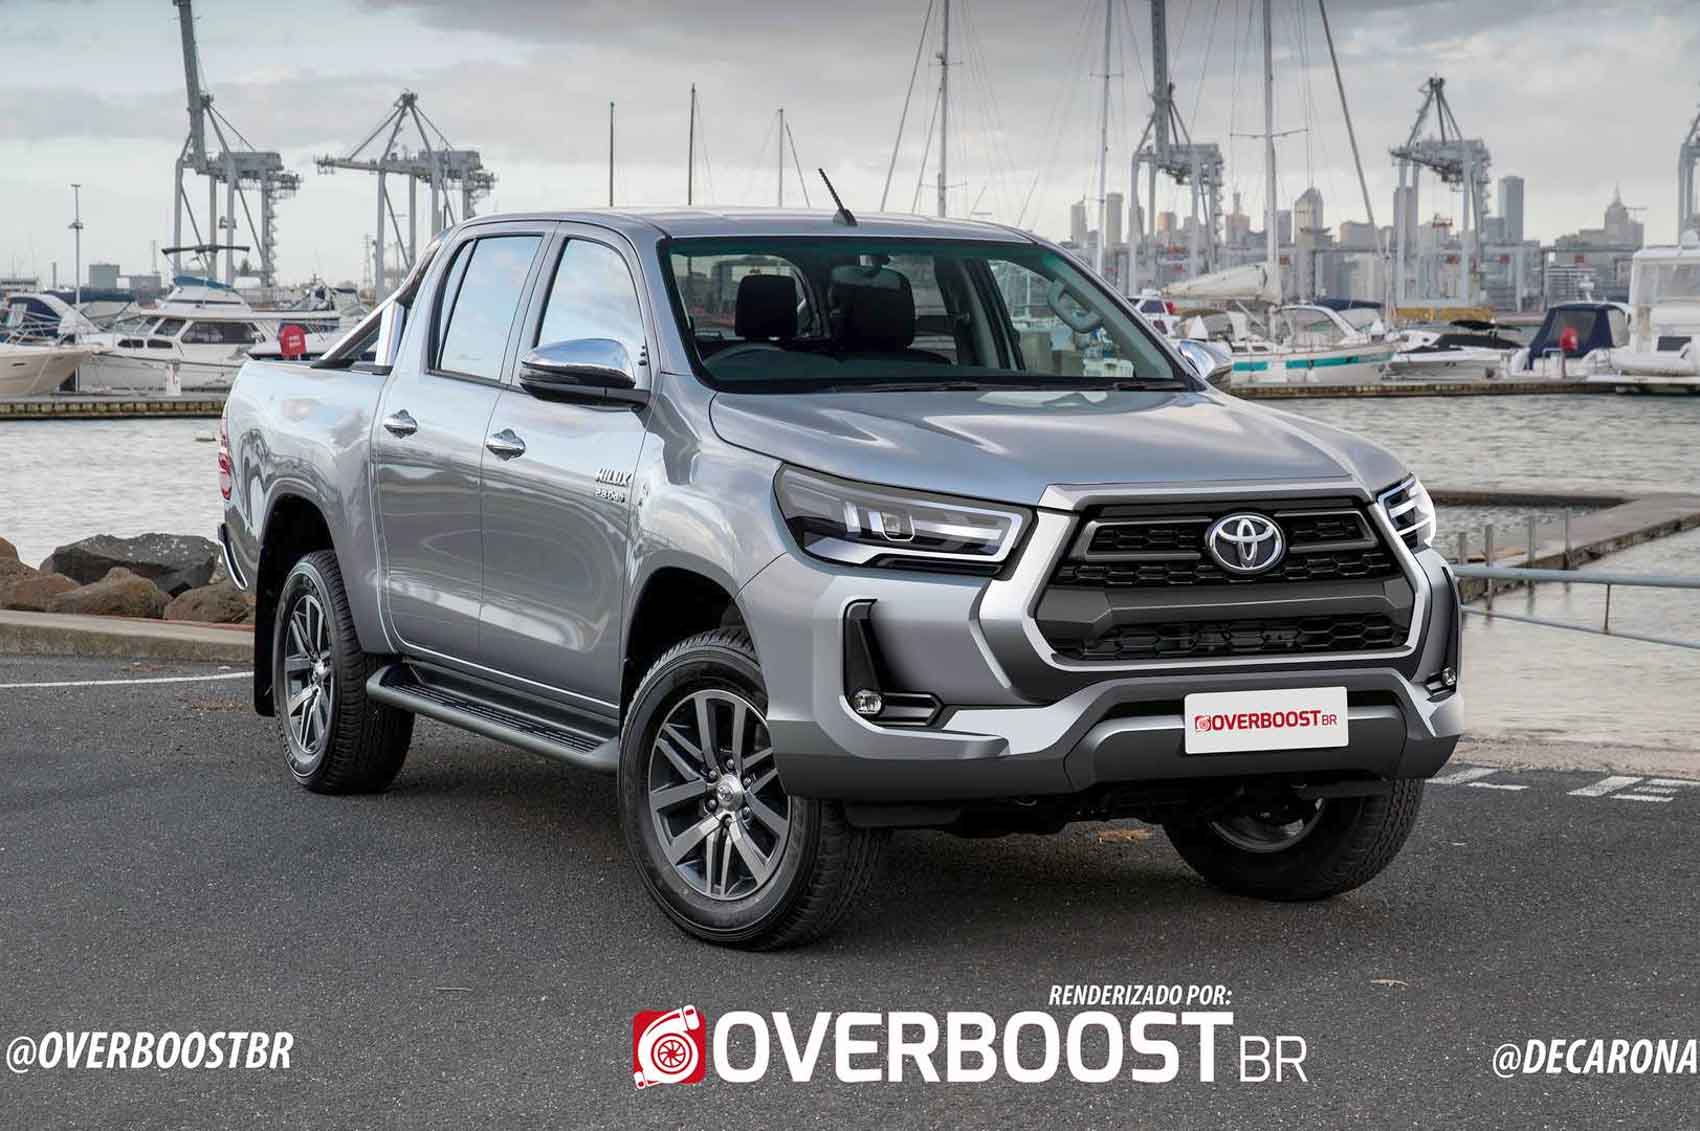 Heavily Updated (2021) Toyota Hilux Pickup Truck Global Debut On June 4